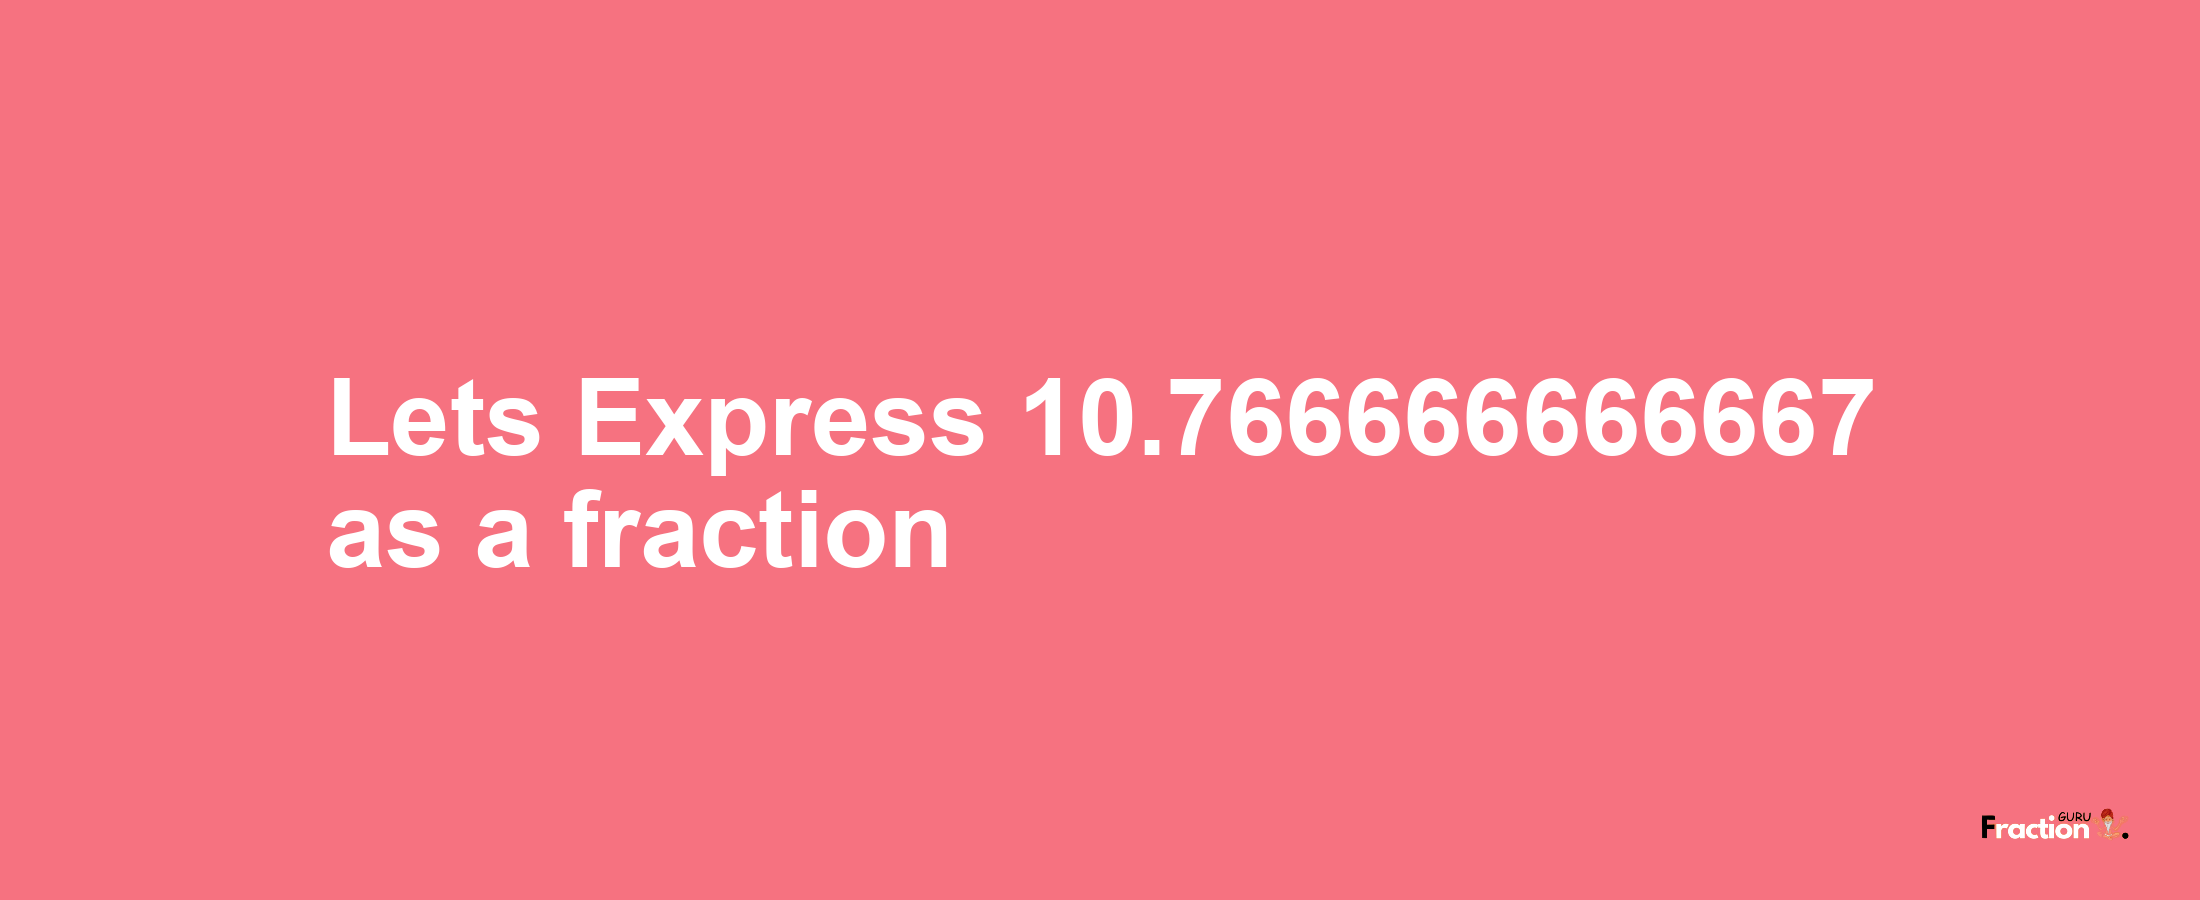 Lets Express 10.766666666667 as afraction